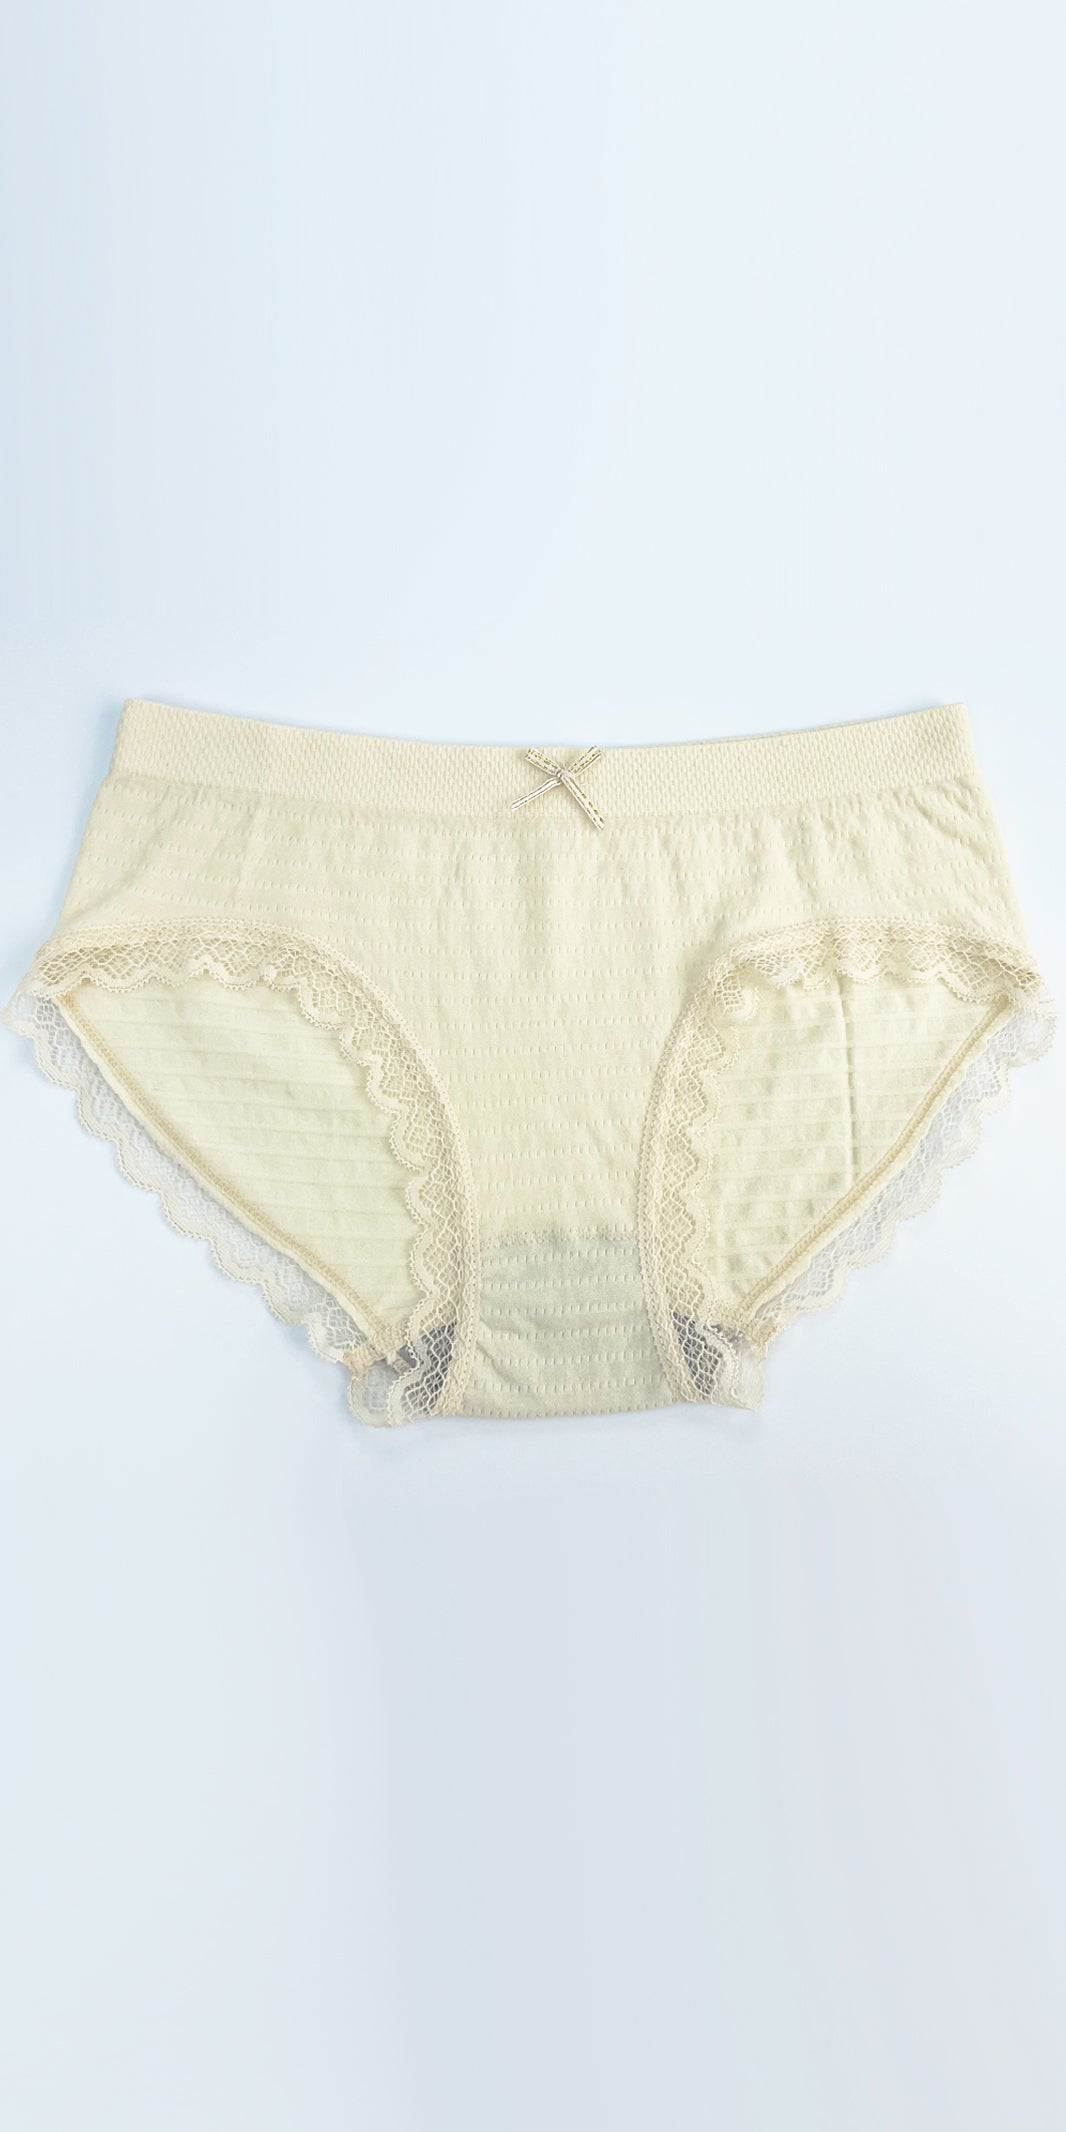 Cotton Graphene Antibacterial Breathable Mid-Rise Lace Trimmed Panties